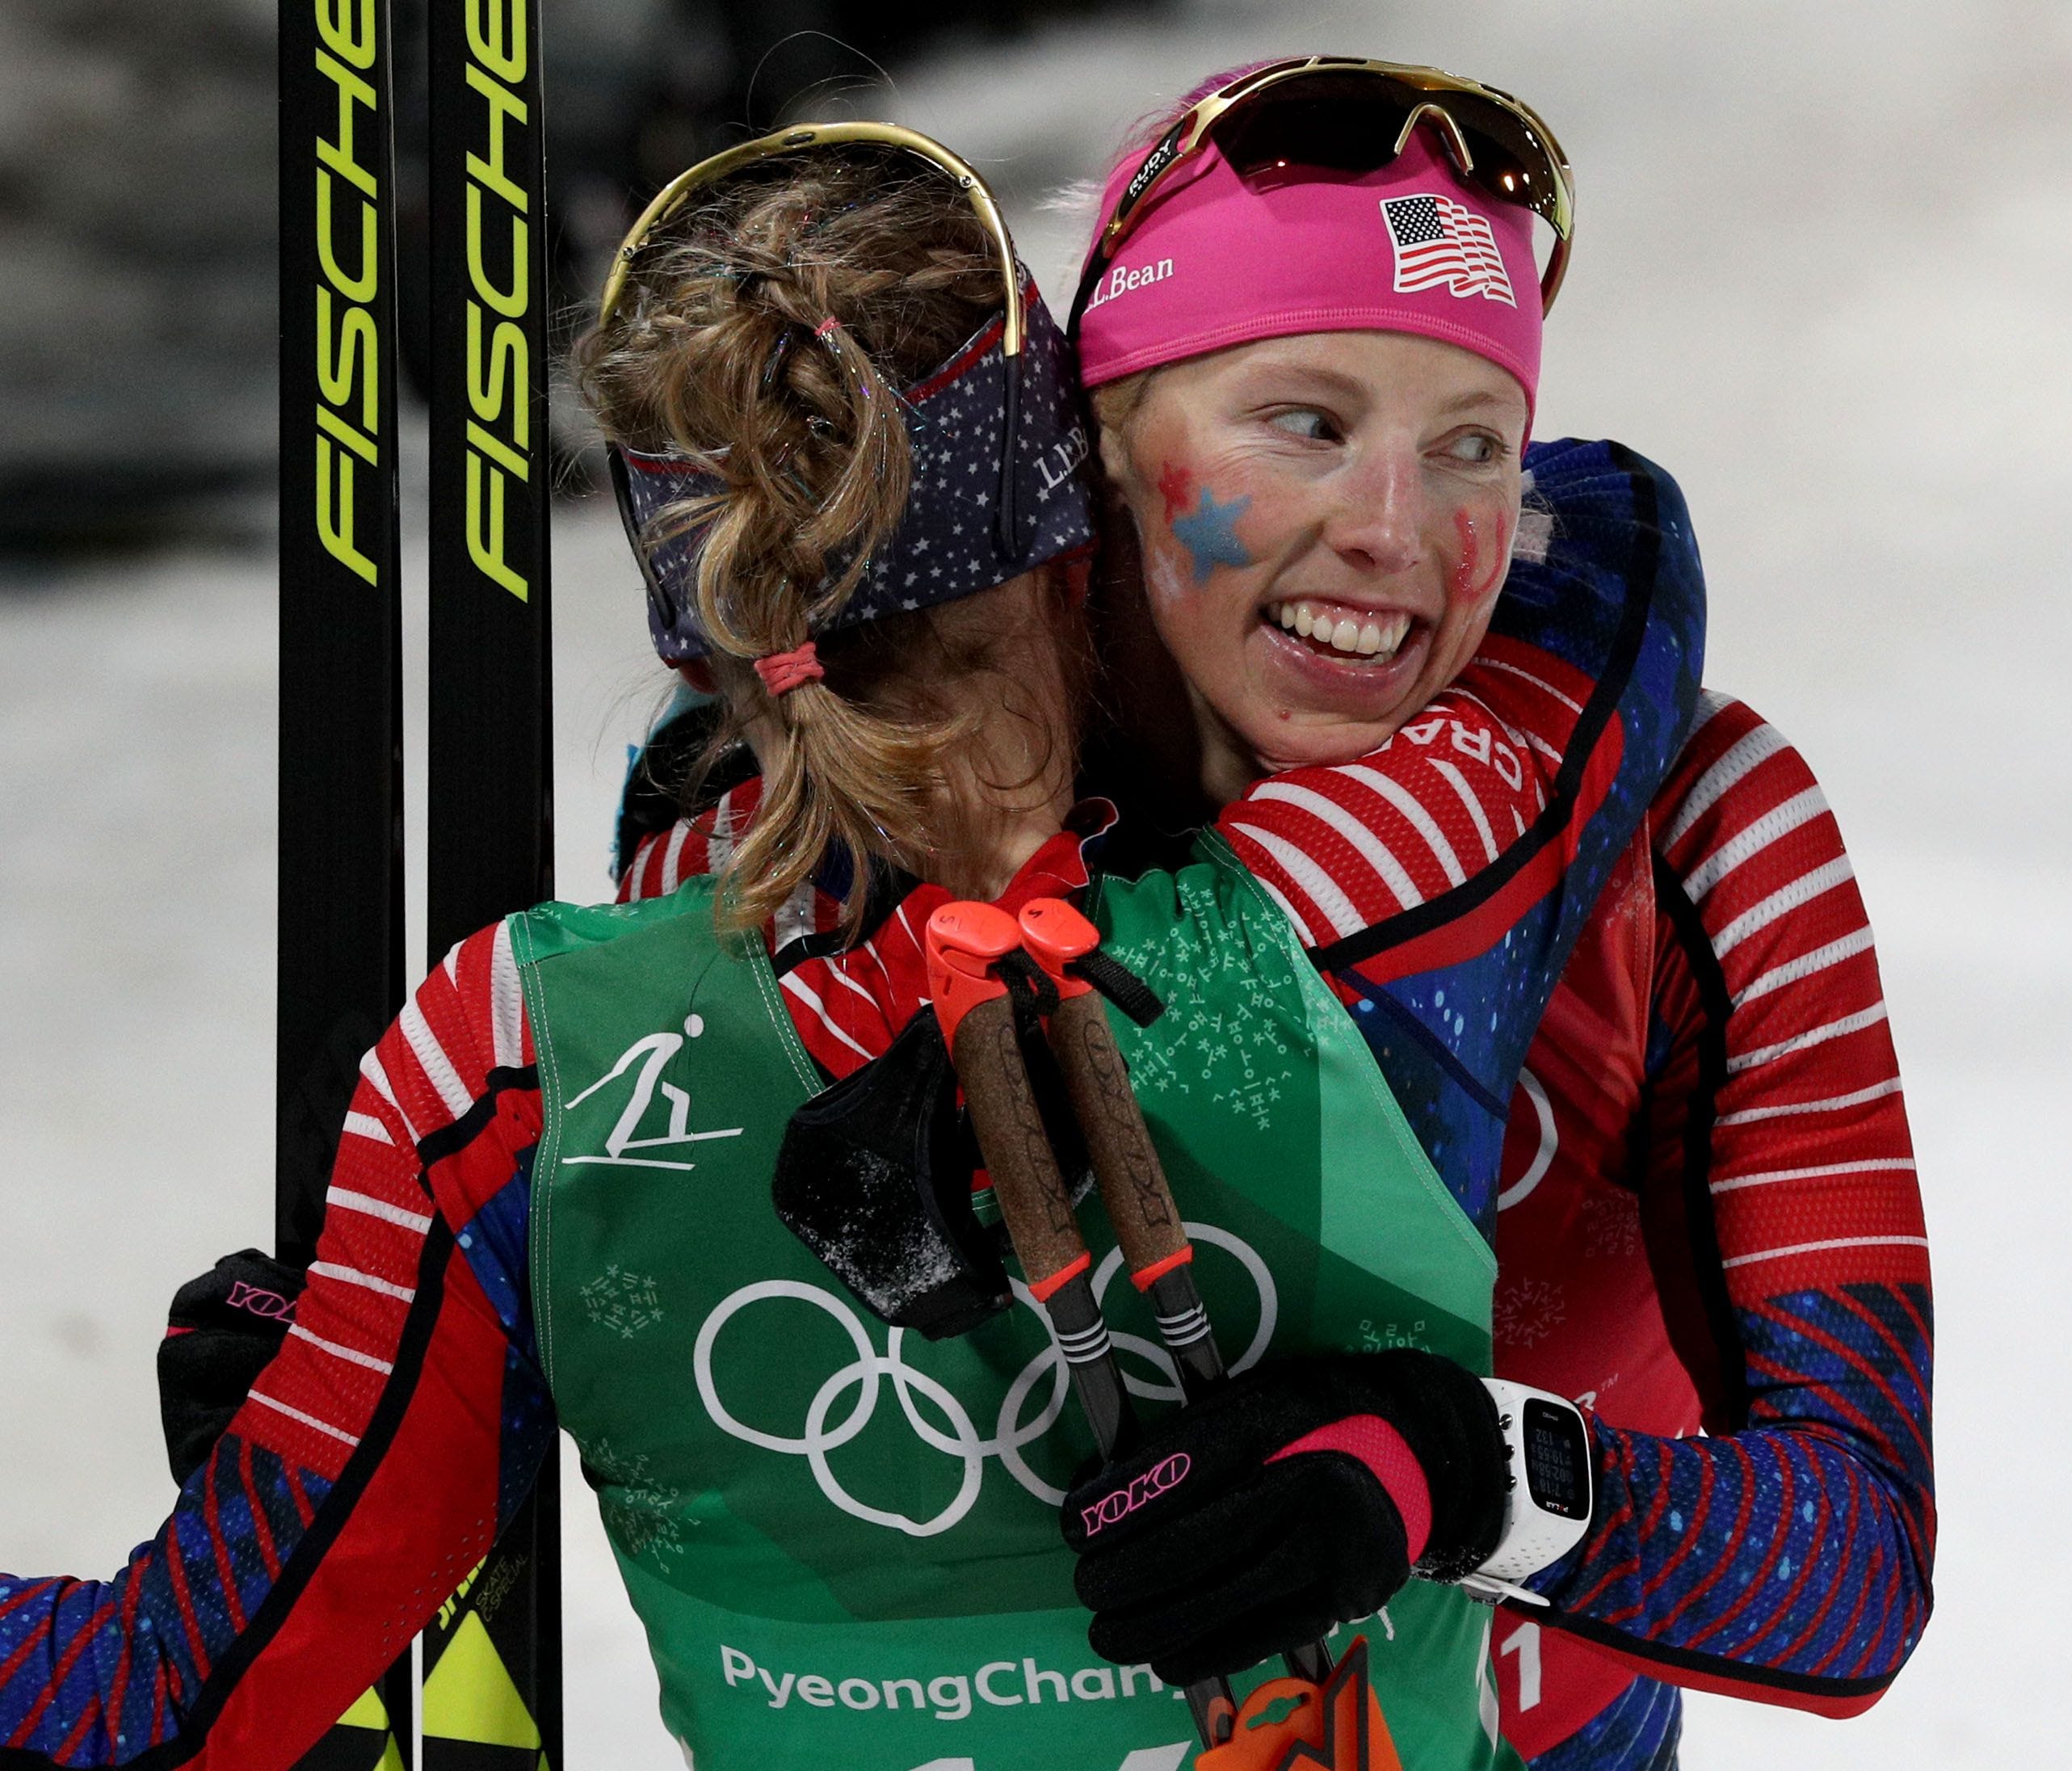 Jessie Diggins (left) and Kikkan Randall  celebrate winning the gold medal in the cross-country skiing team sprint freestyle final during the Pyeongchang 2018 Olympic Winter Games at Alpensia Cross-Country Centre.